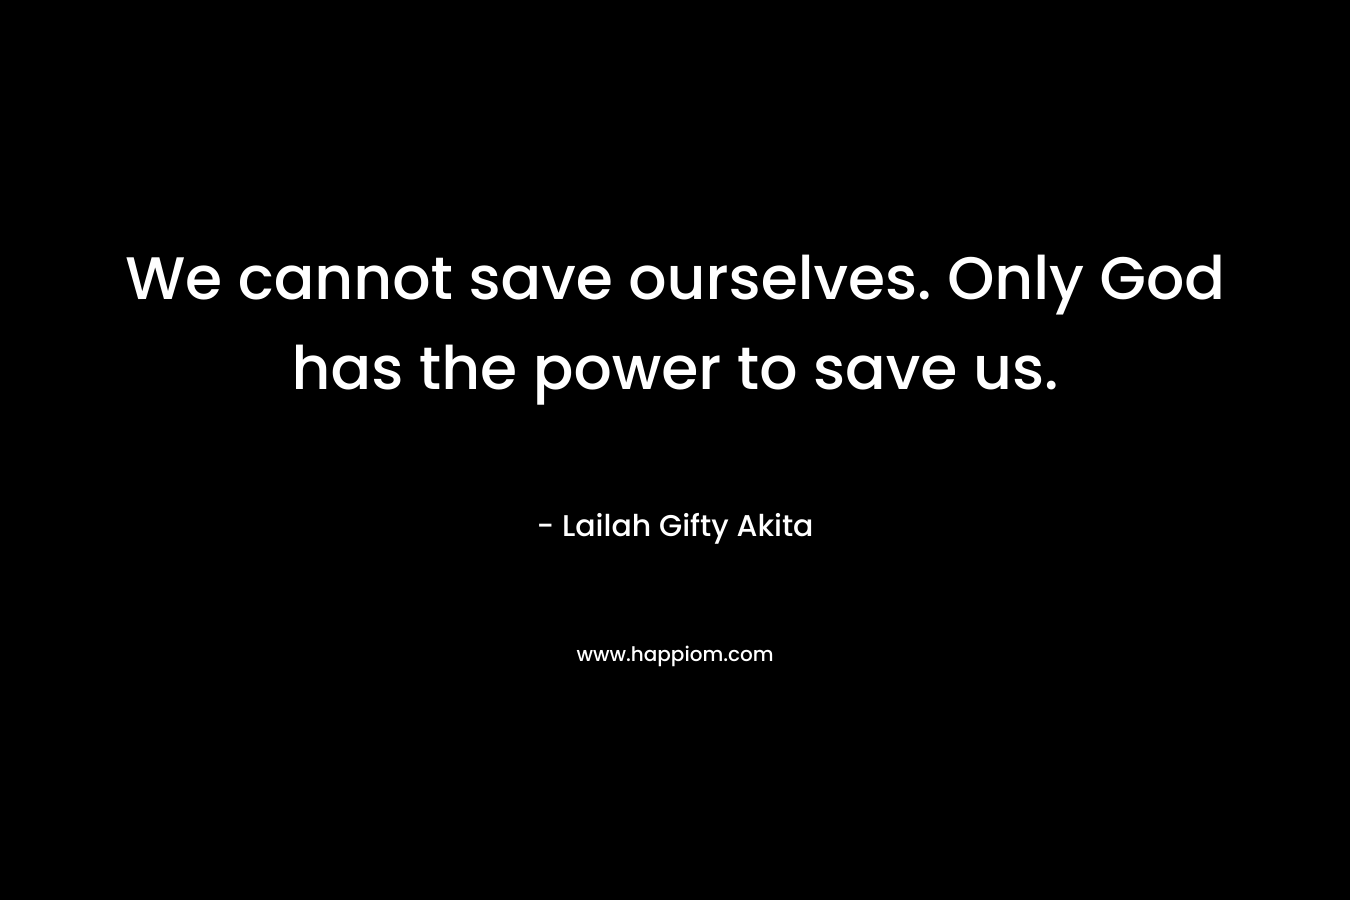 We cannot save ourselves. Only God has the power to save us.